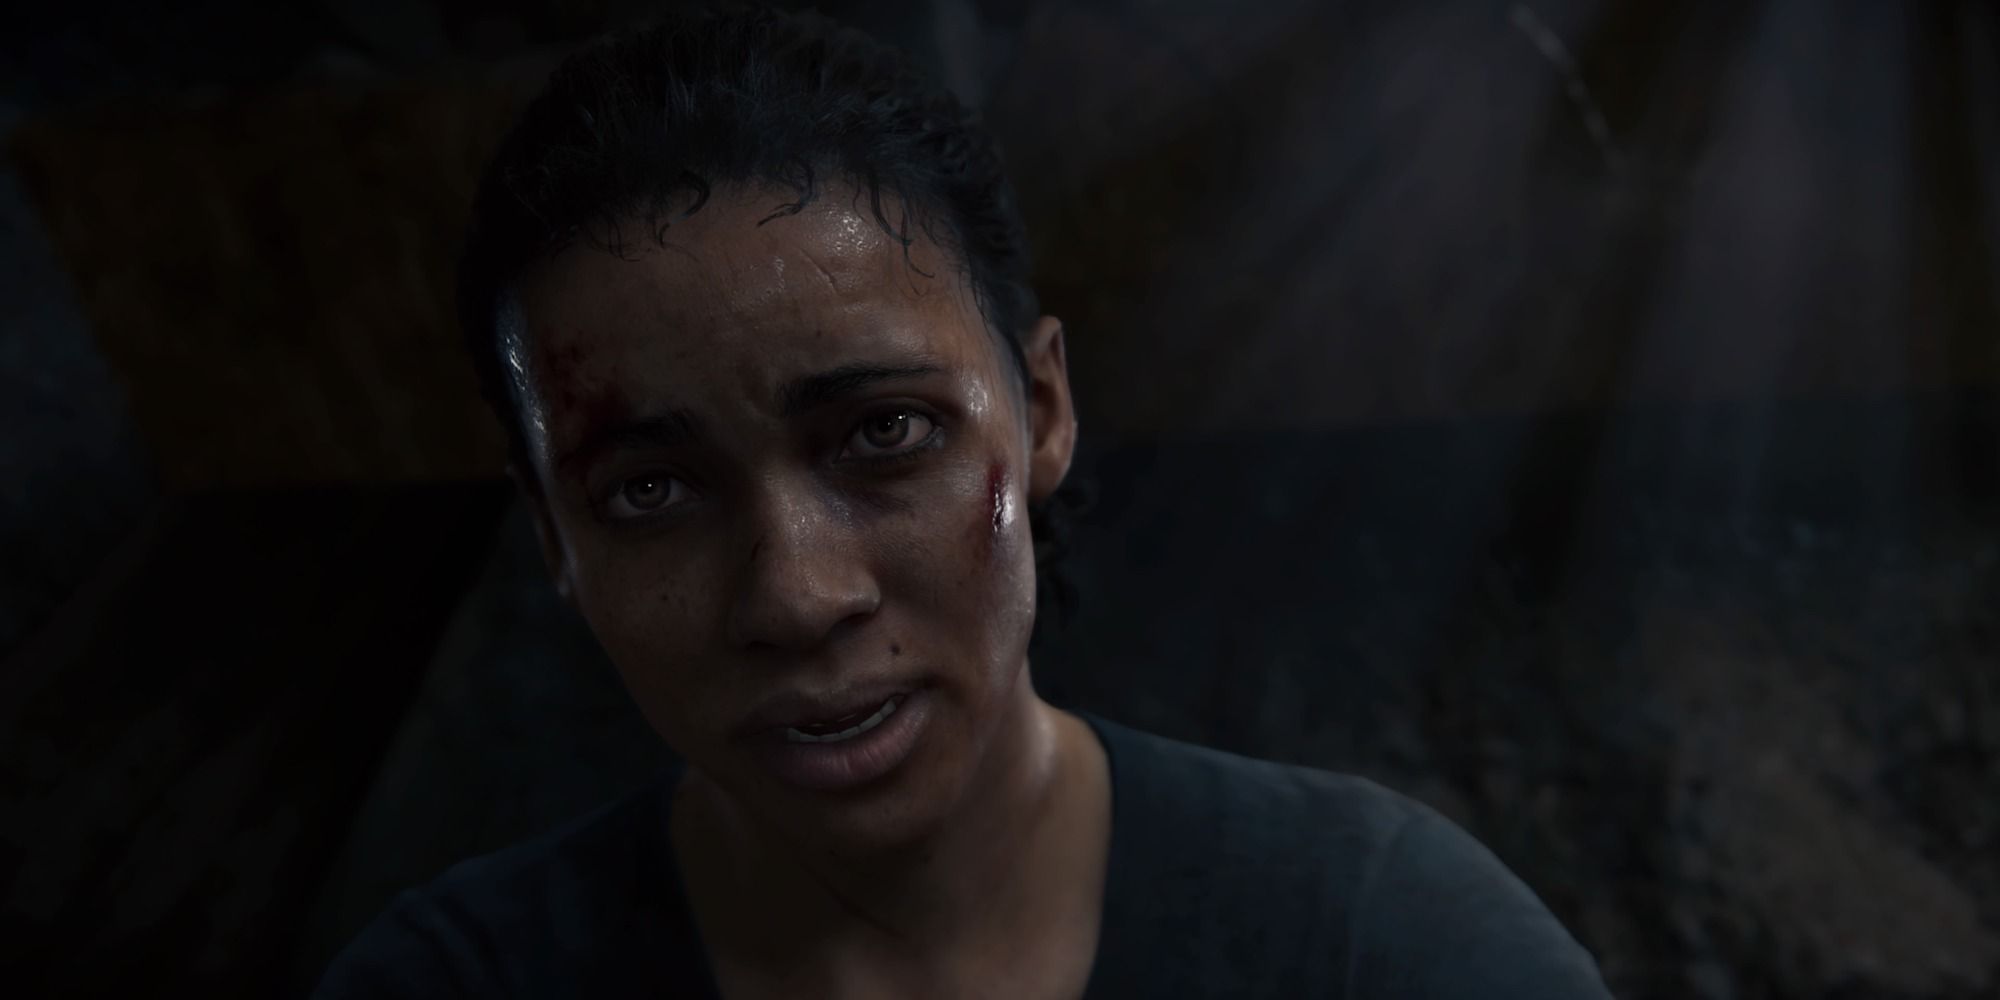 lost legacy nadine cut up and injured